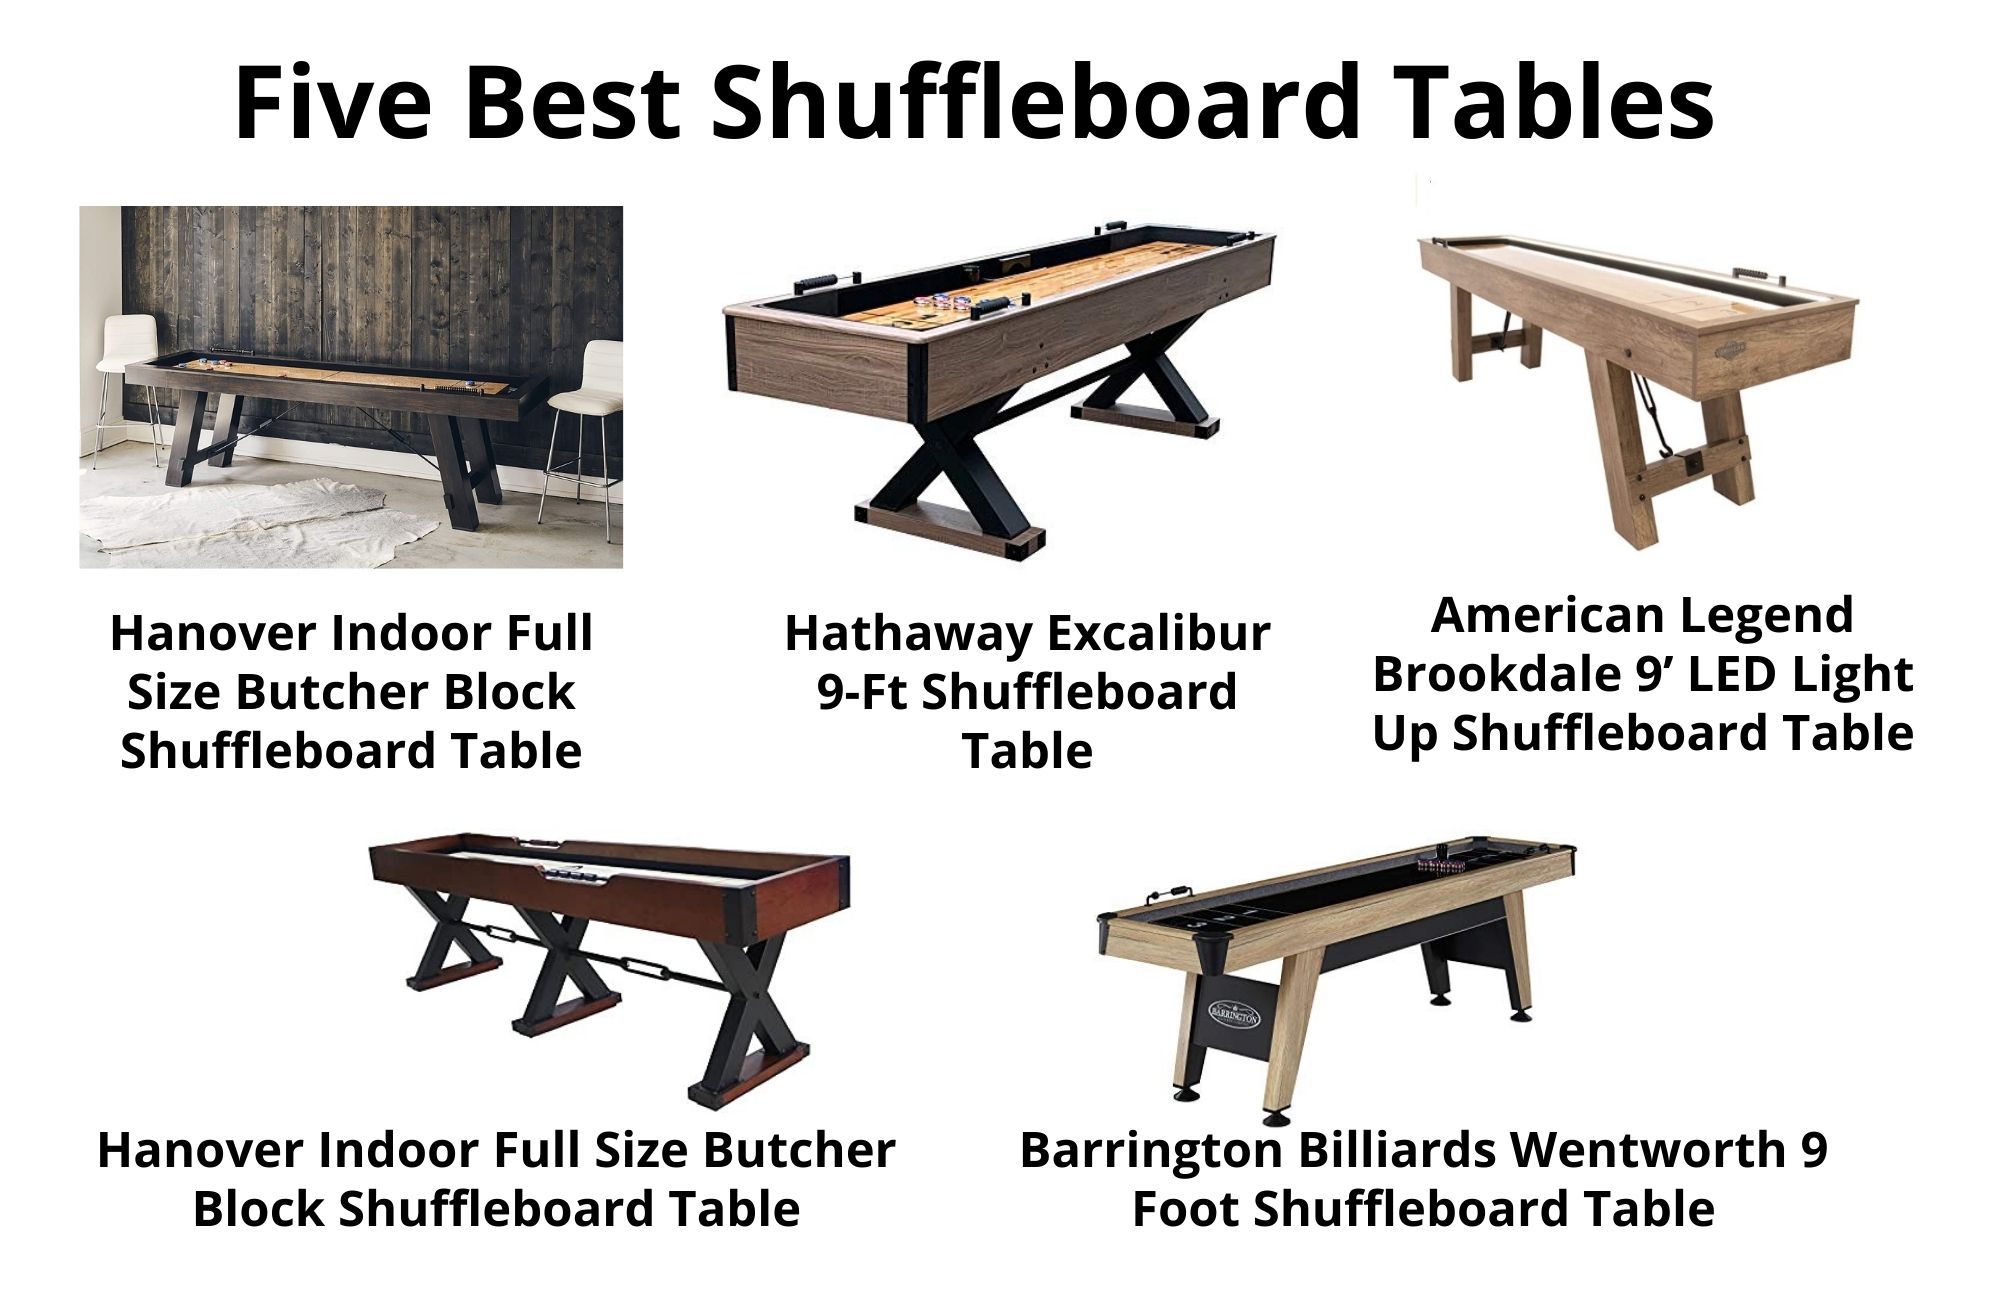 The Best Five Shuffleboard Tables have a classy appearance and are all made of solid and high-quality wood